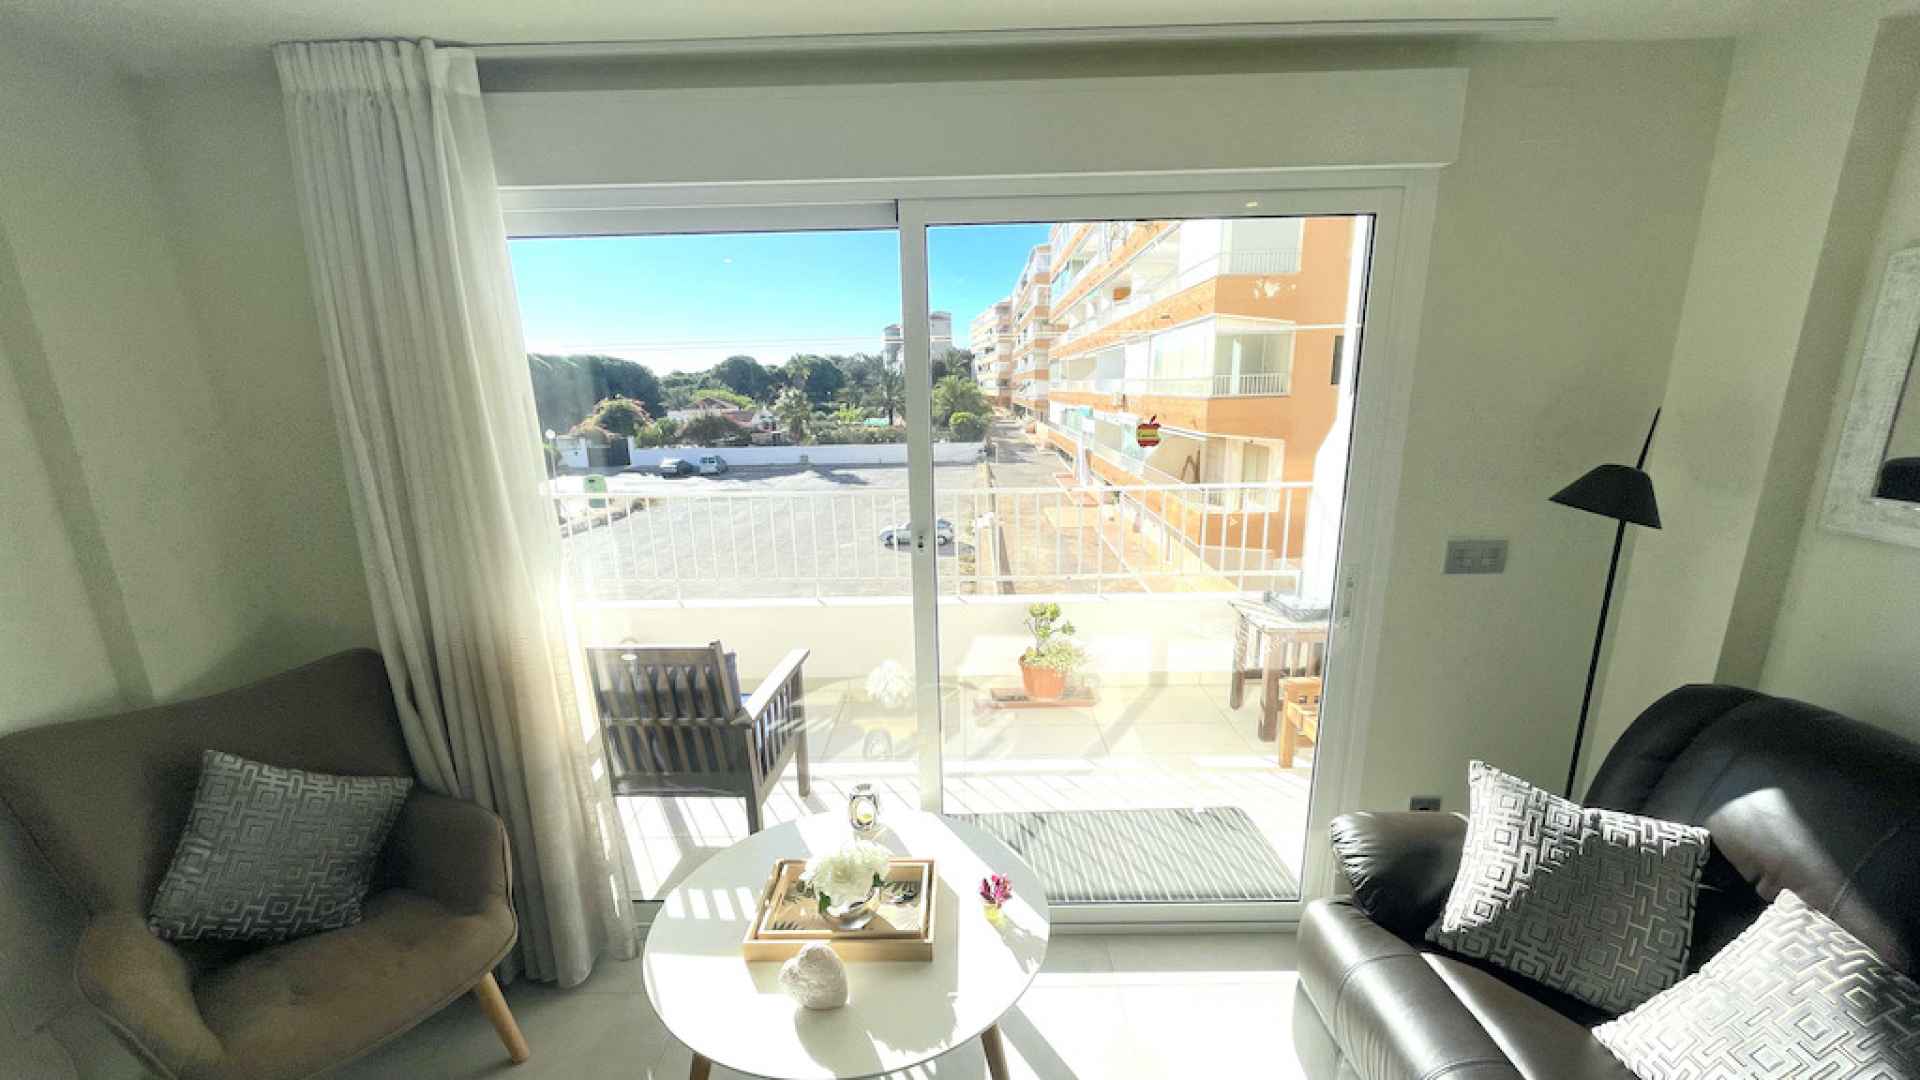 48297_fabulously_renovated_coastal_apartment_walking_distance_to_the_beach_241123113010_img_8452